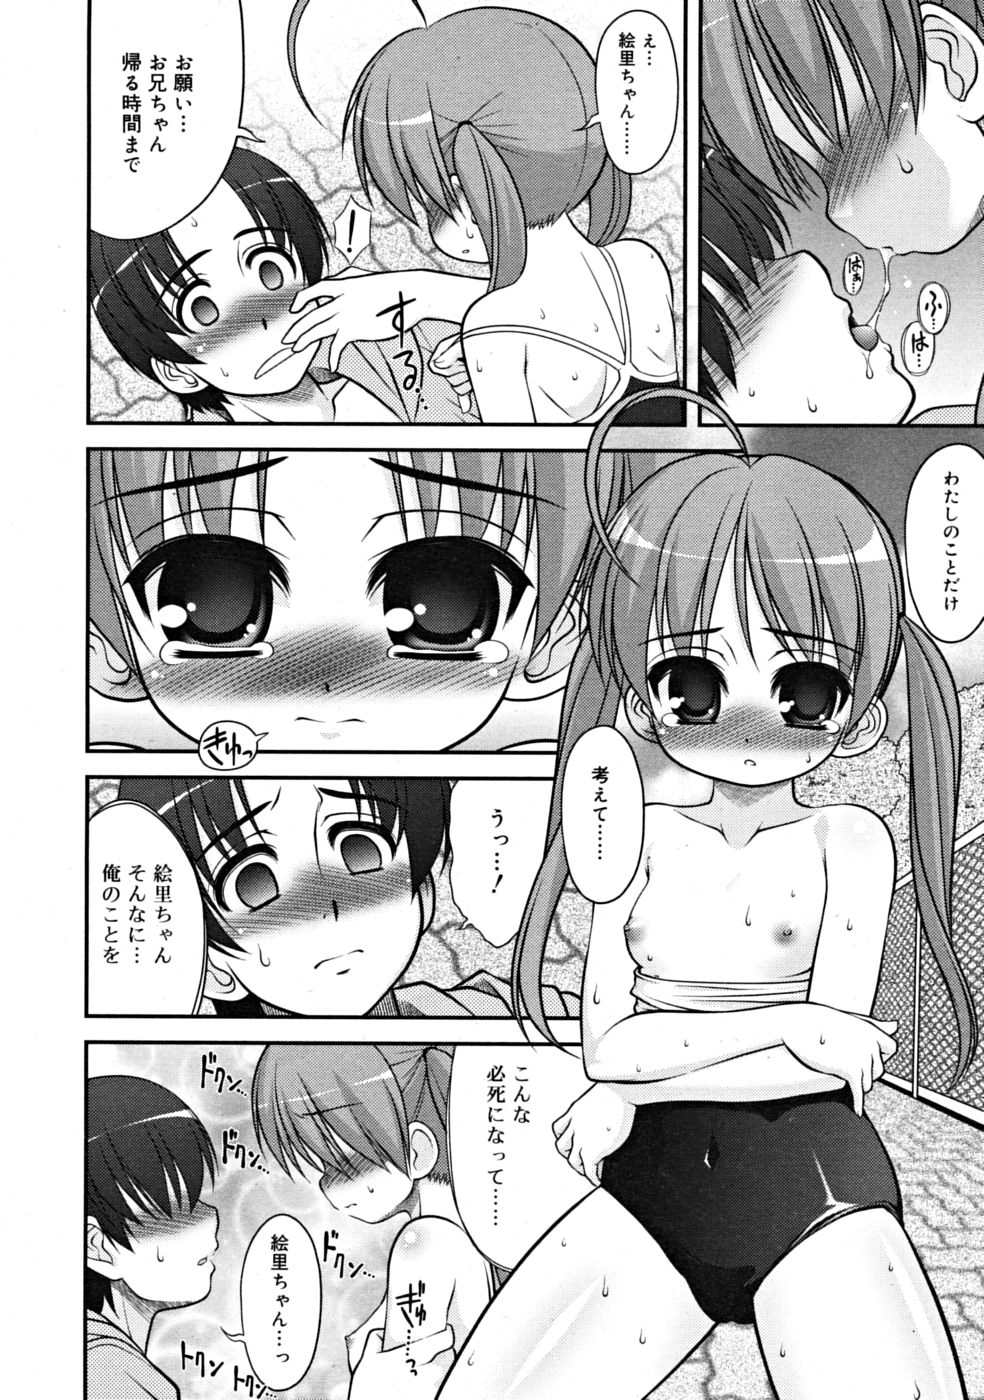 COMIC RiN 2008-09 page 32 full